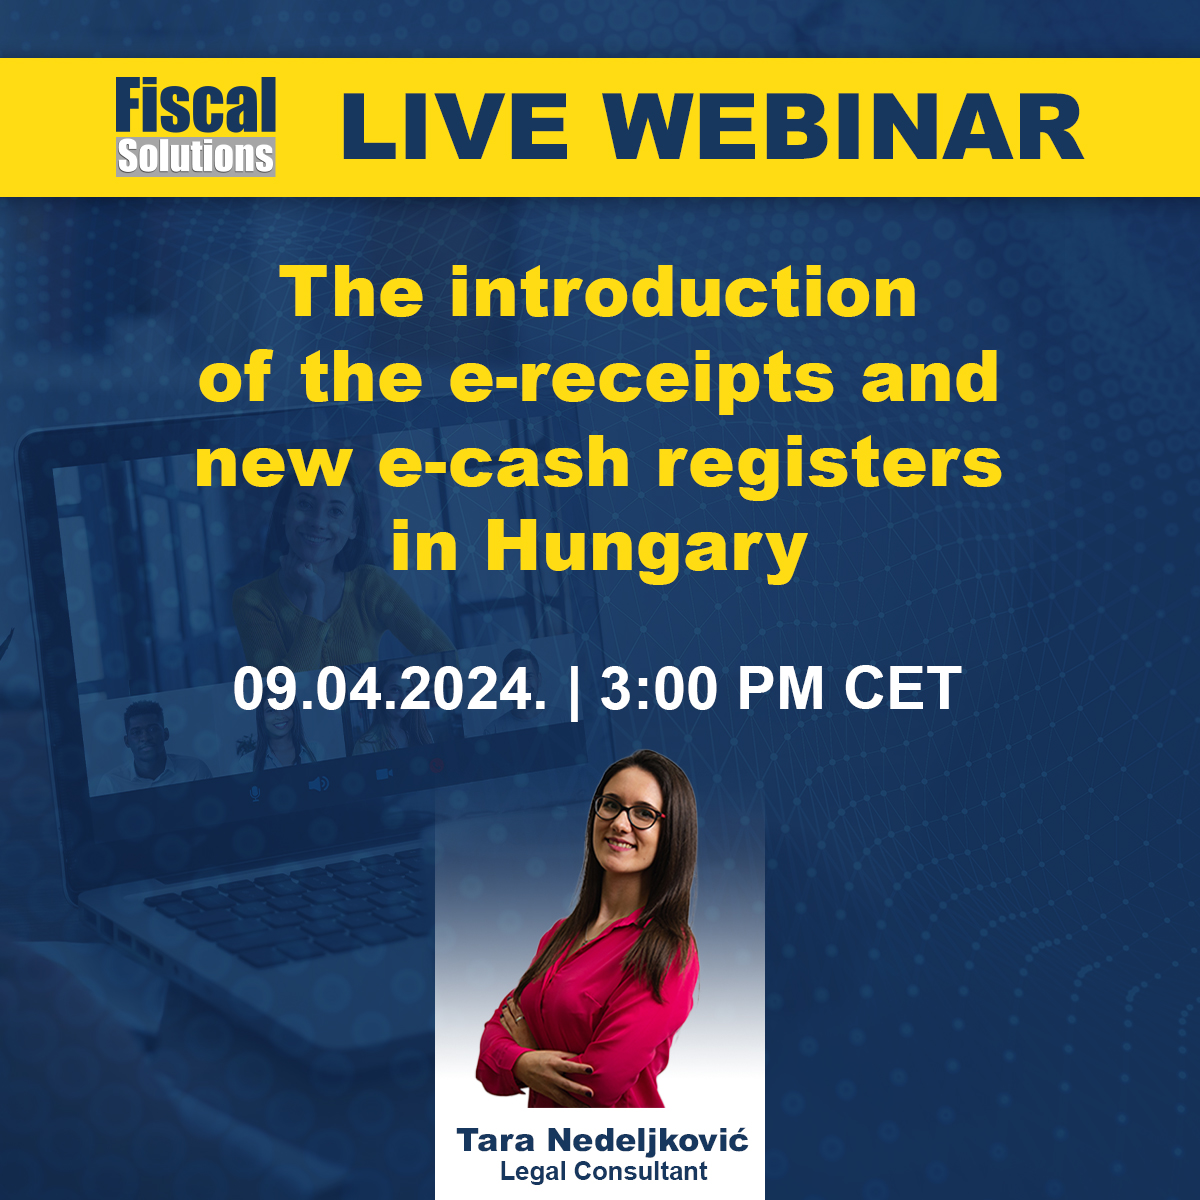 Our exclusive live webinar is just around the corner! Have you already secured your spot and registered?

Our legal consultant, Tara Nedeljković, is thrilled to tell you more about e-receipts and e-cash registers in hashtag #Hungary!

So, get started, the registration link is in…